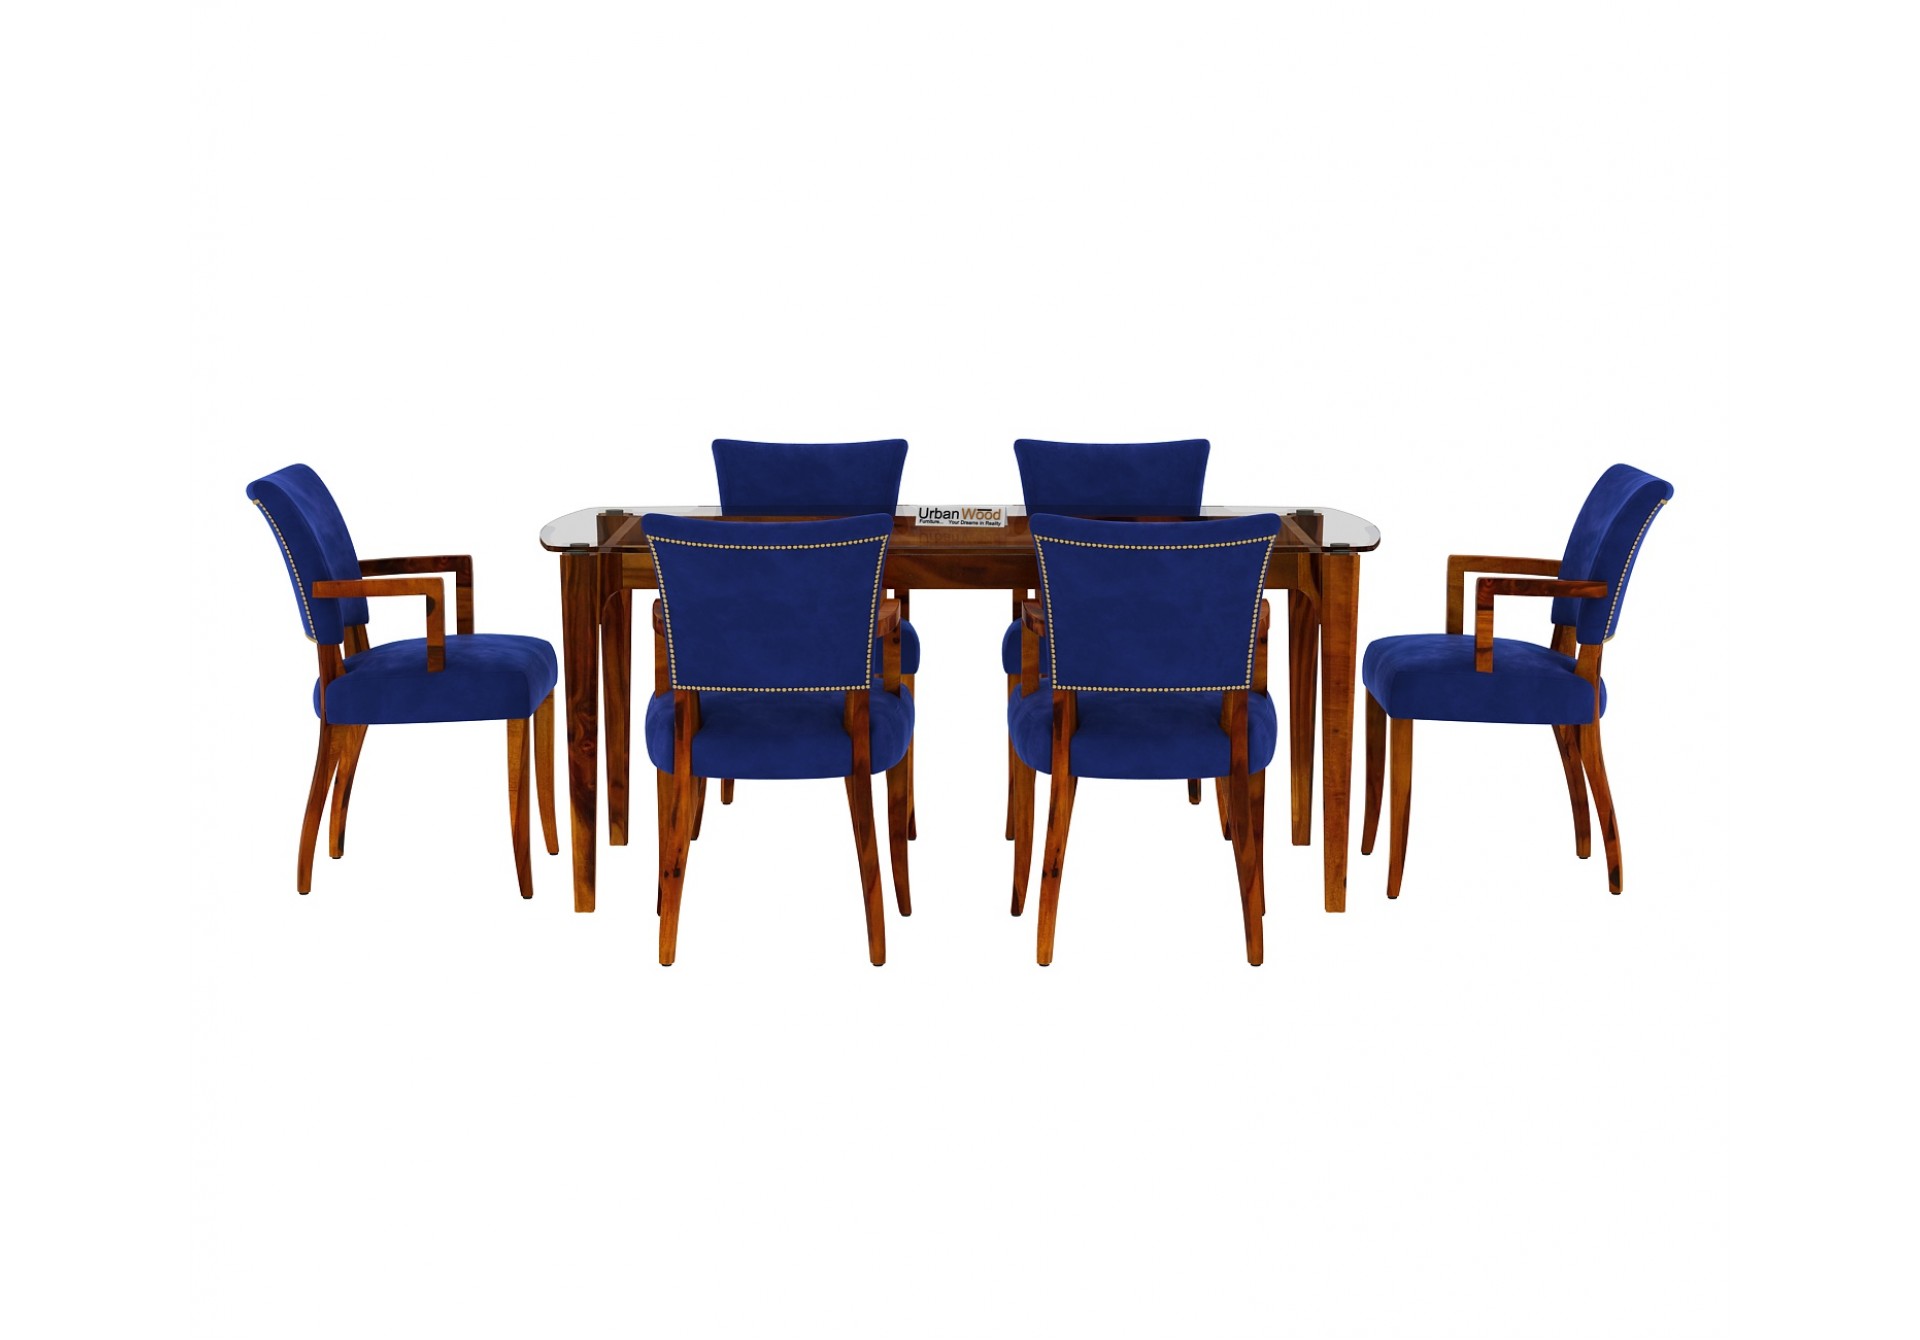 Quipo 6-Seater Dining Table Set With Arms 